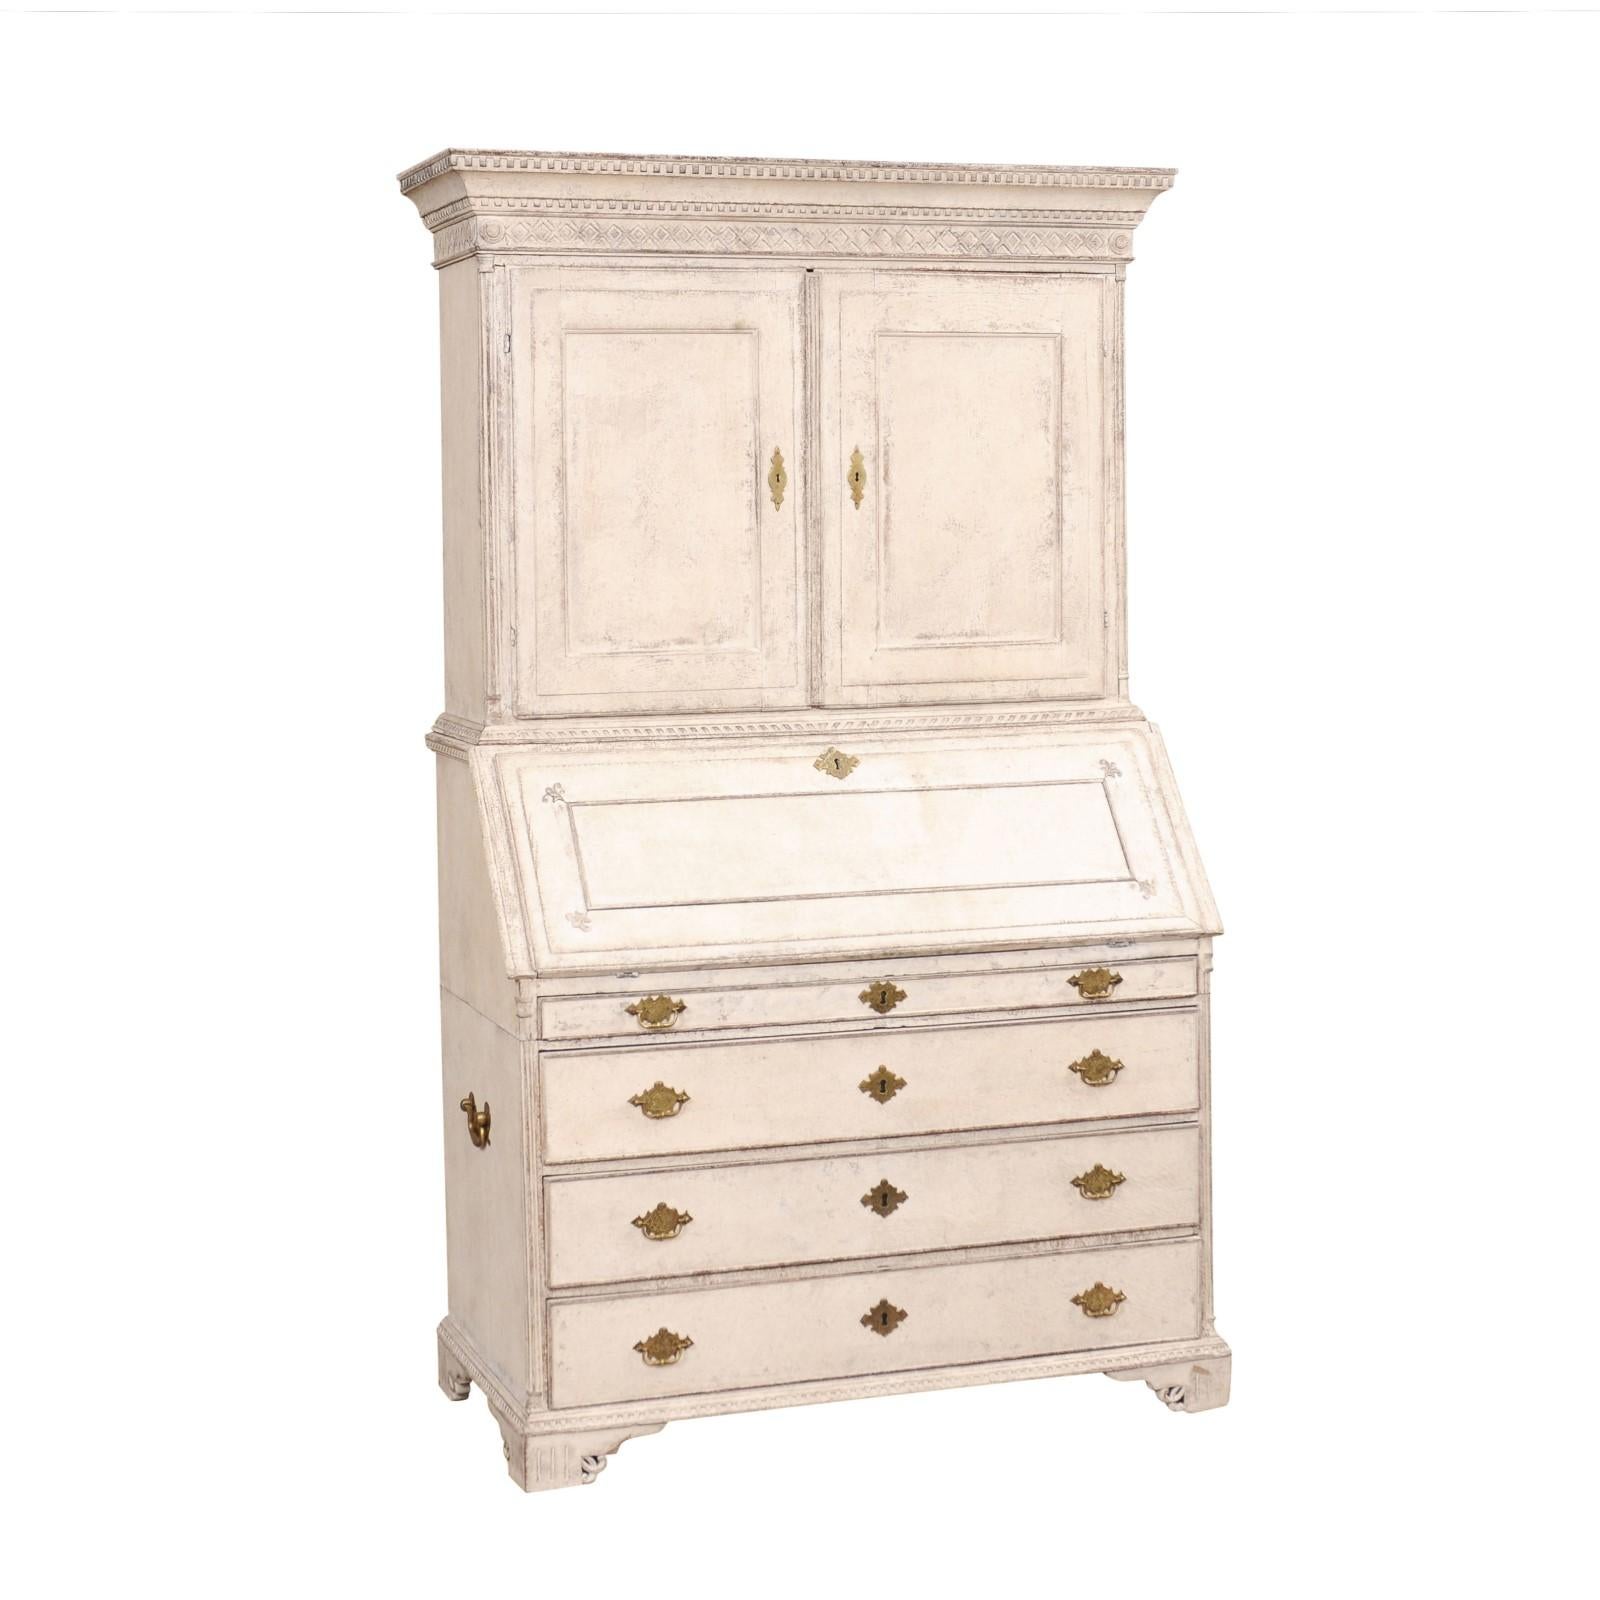 A Swedish Gustavian period two-part tall secretary from circa 1790 with elegant carved décor, creamy white painted finish and multiple inner drawers inside the slant-front desk. Discover the understated elegance of this Swedish Gustavian period tall